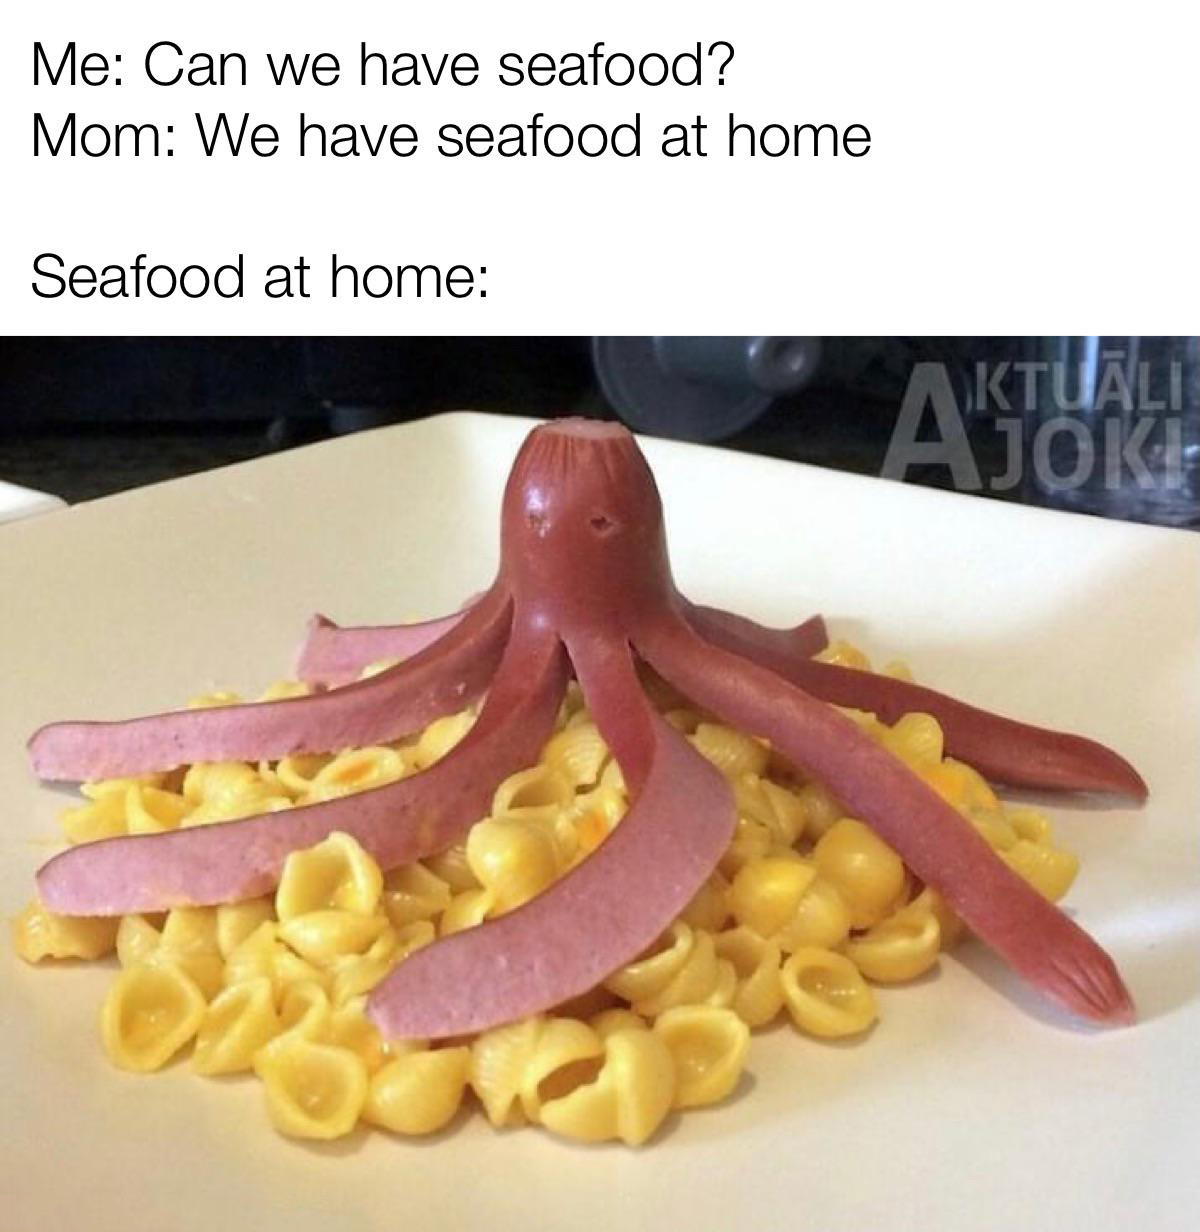 funny memes  - we have seafood at home - Me Can we have seafood? Mom We have seafood at home Seafood at home 33 Ktuali Akt Joki